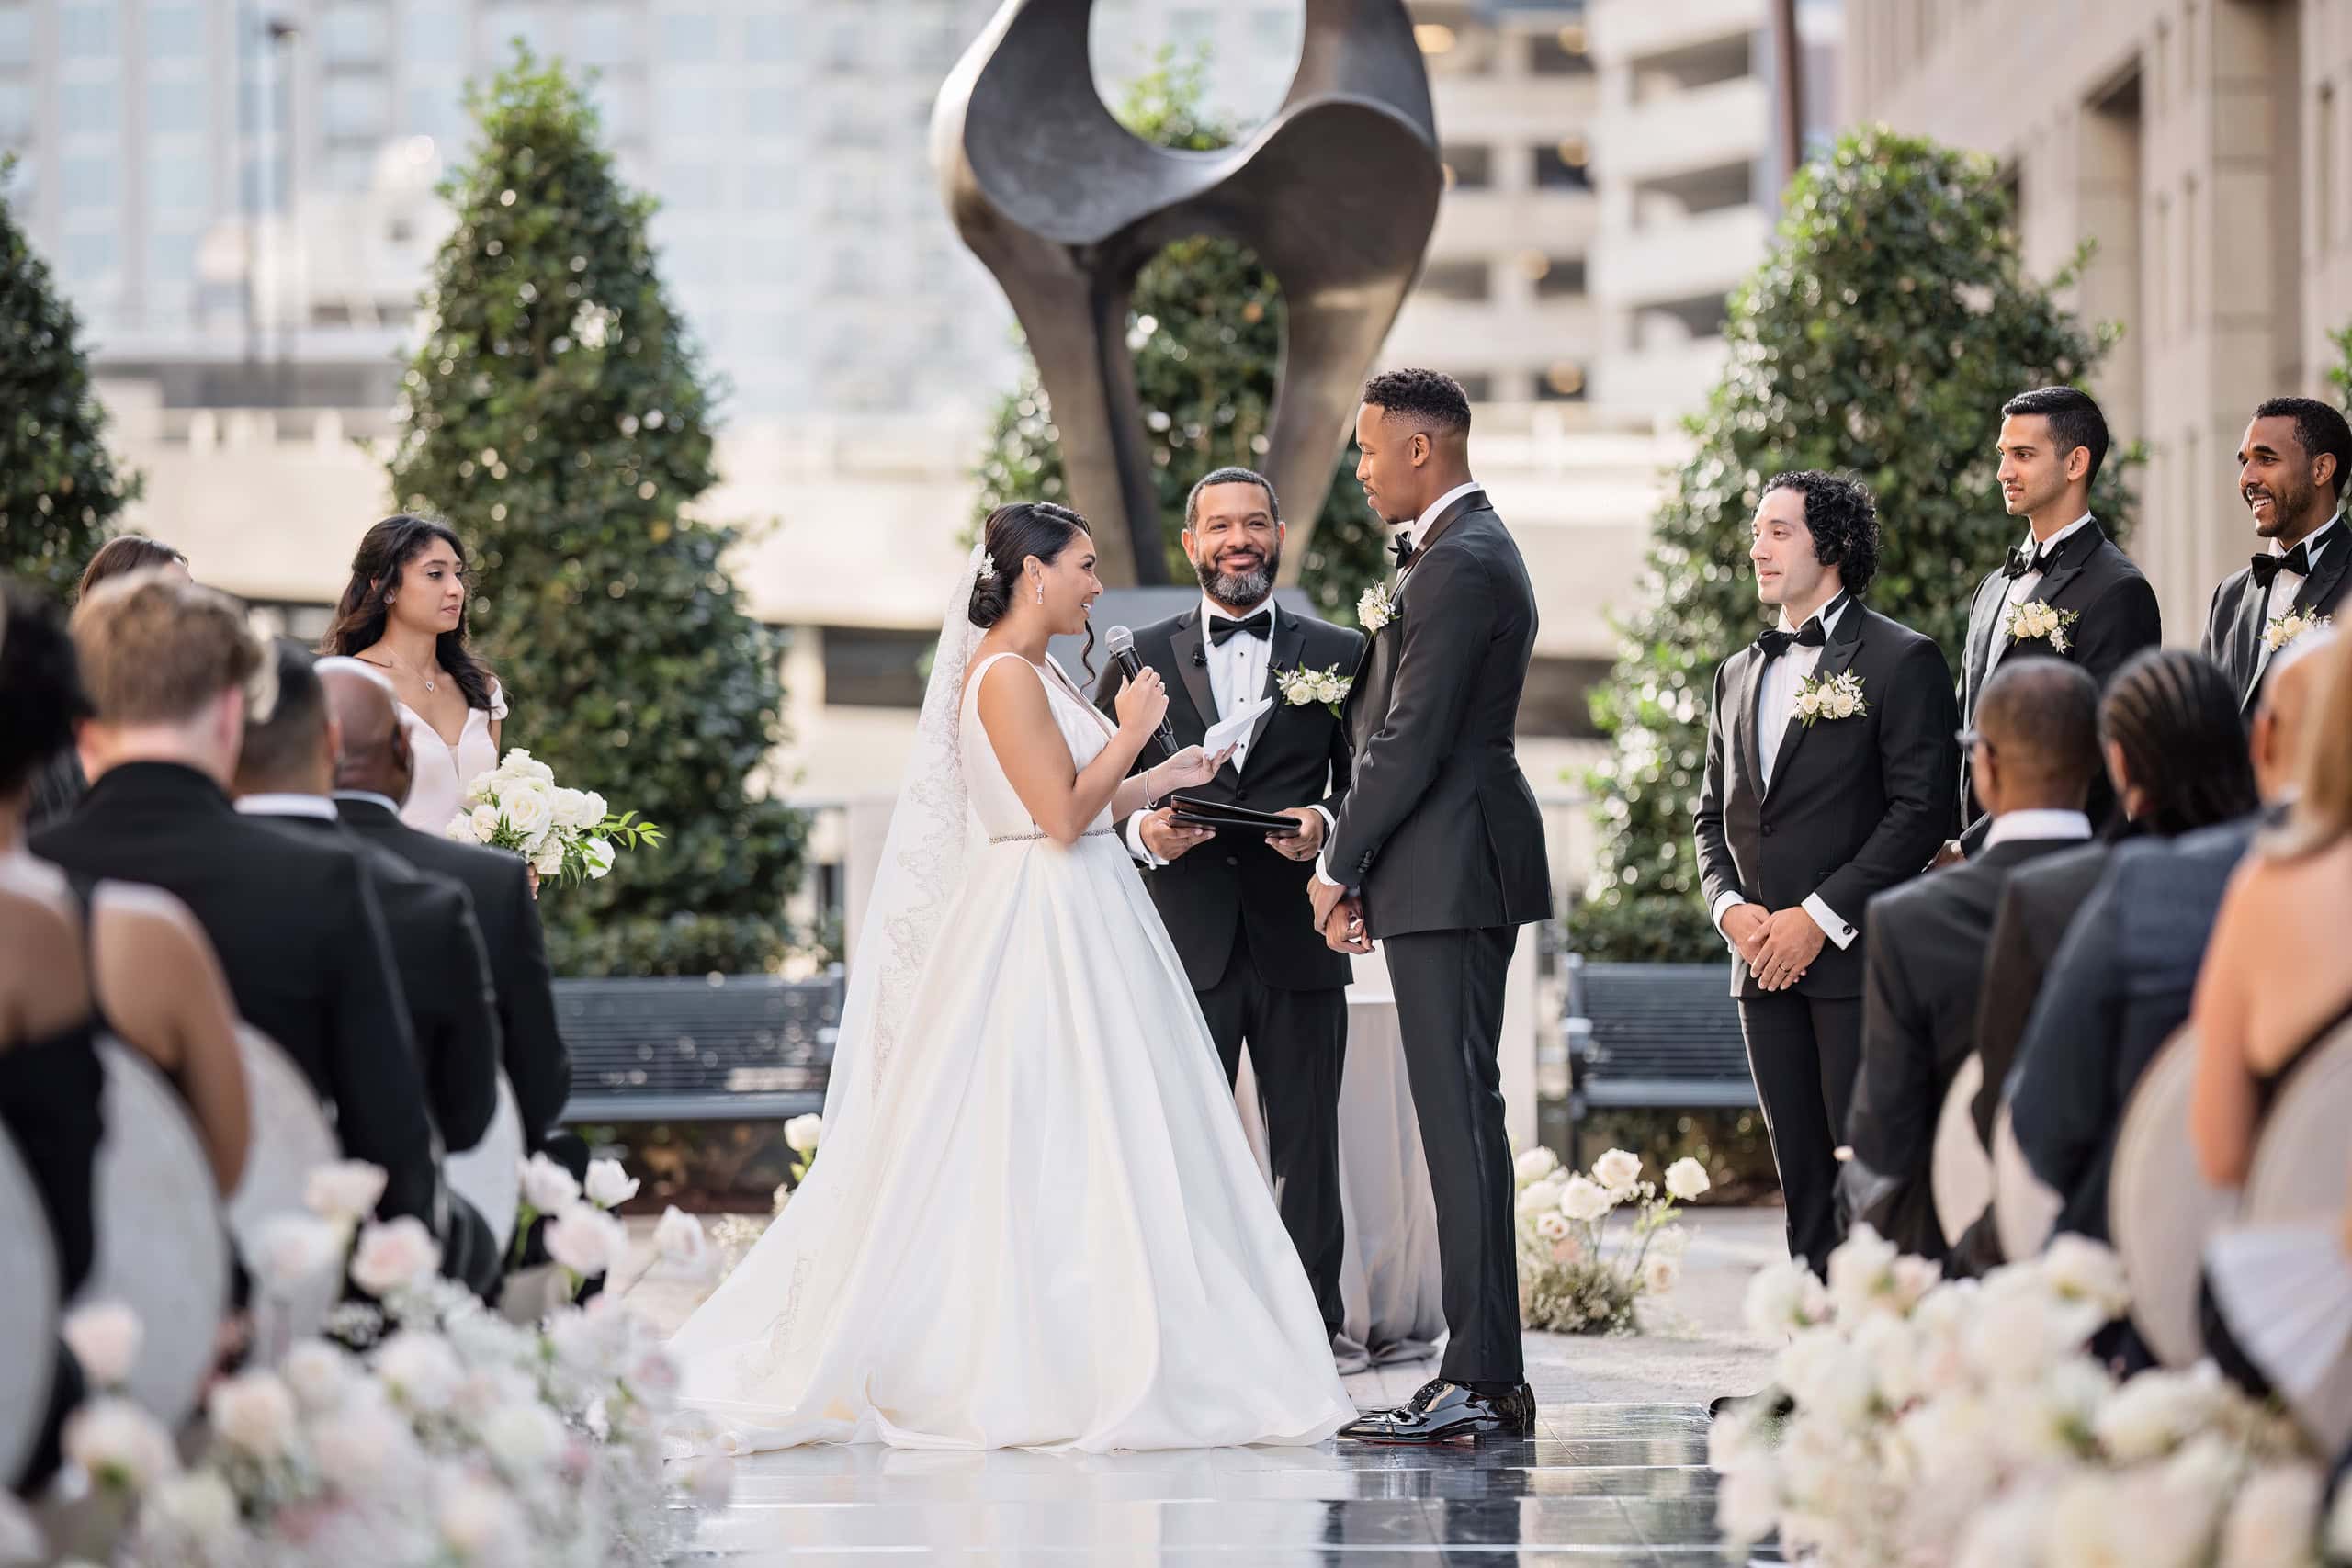 A bride and groom exchange vows at a Grand Bohemian Charlotte wedding ceremony in an urban setting, surrounded by groomsmen, bridesmaids, and guests with white floral arrangements and modern sculptures nearby.